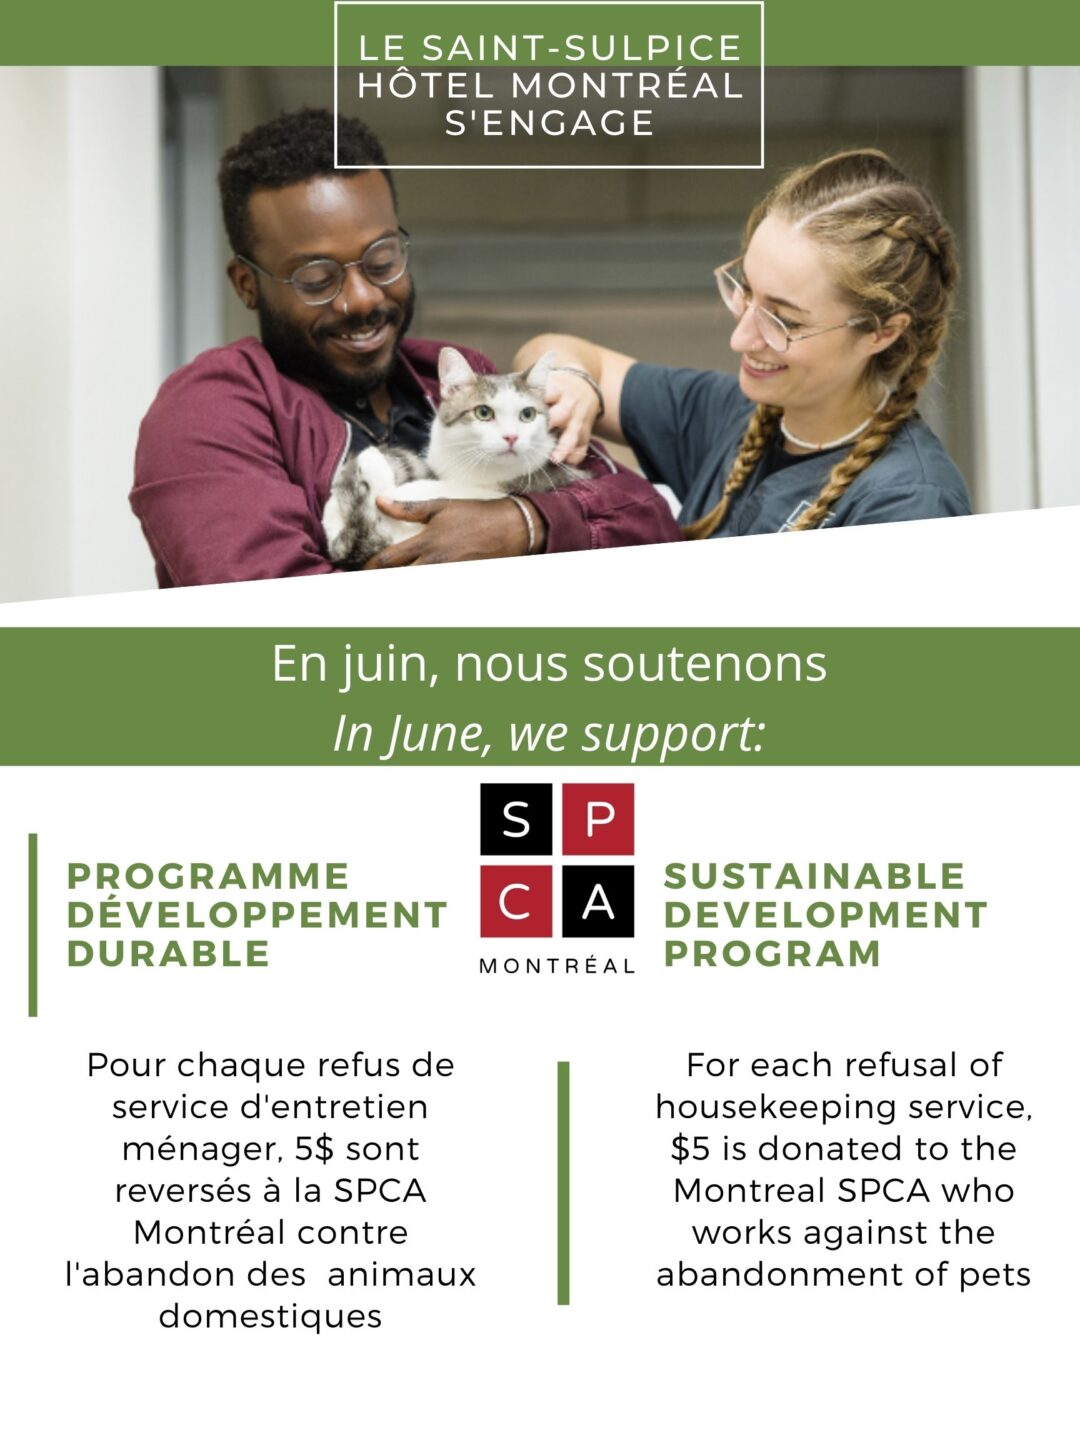 SPCA, the first organism we support with our sustainable development program